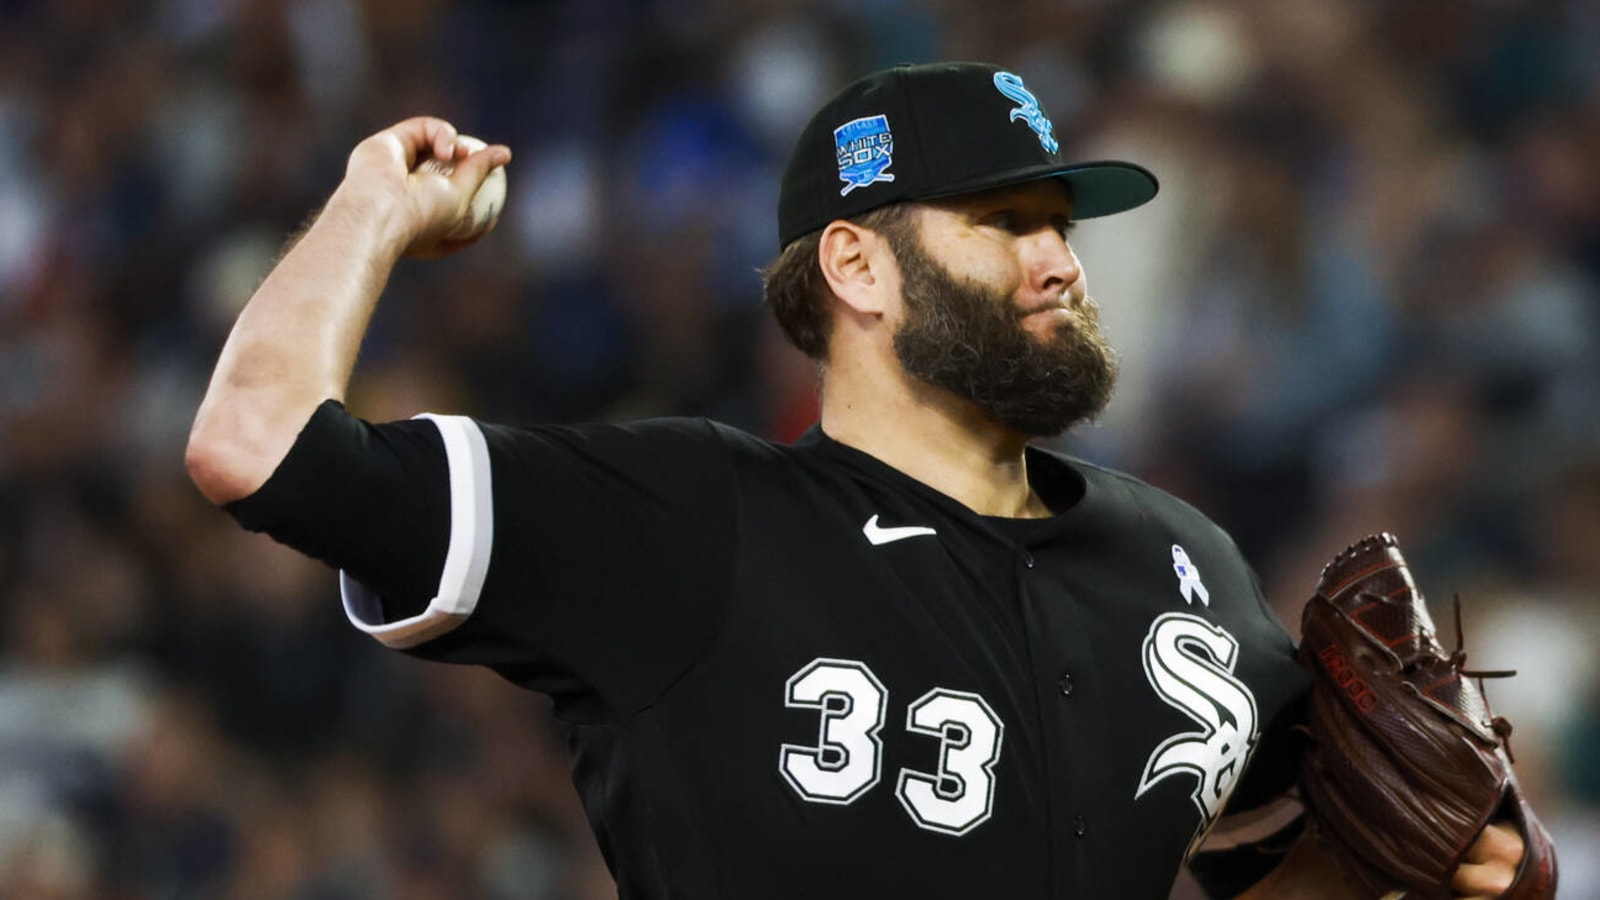 White Sox decide to cut ties with Keuchel